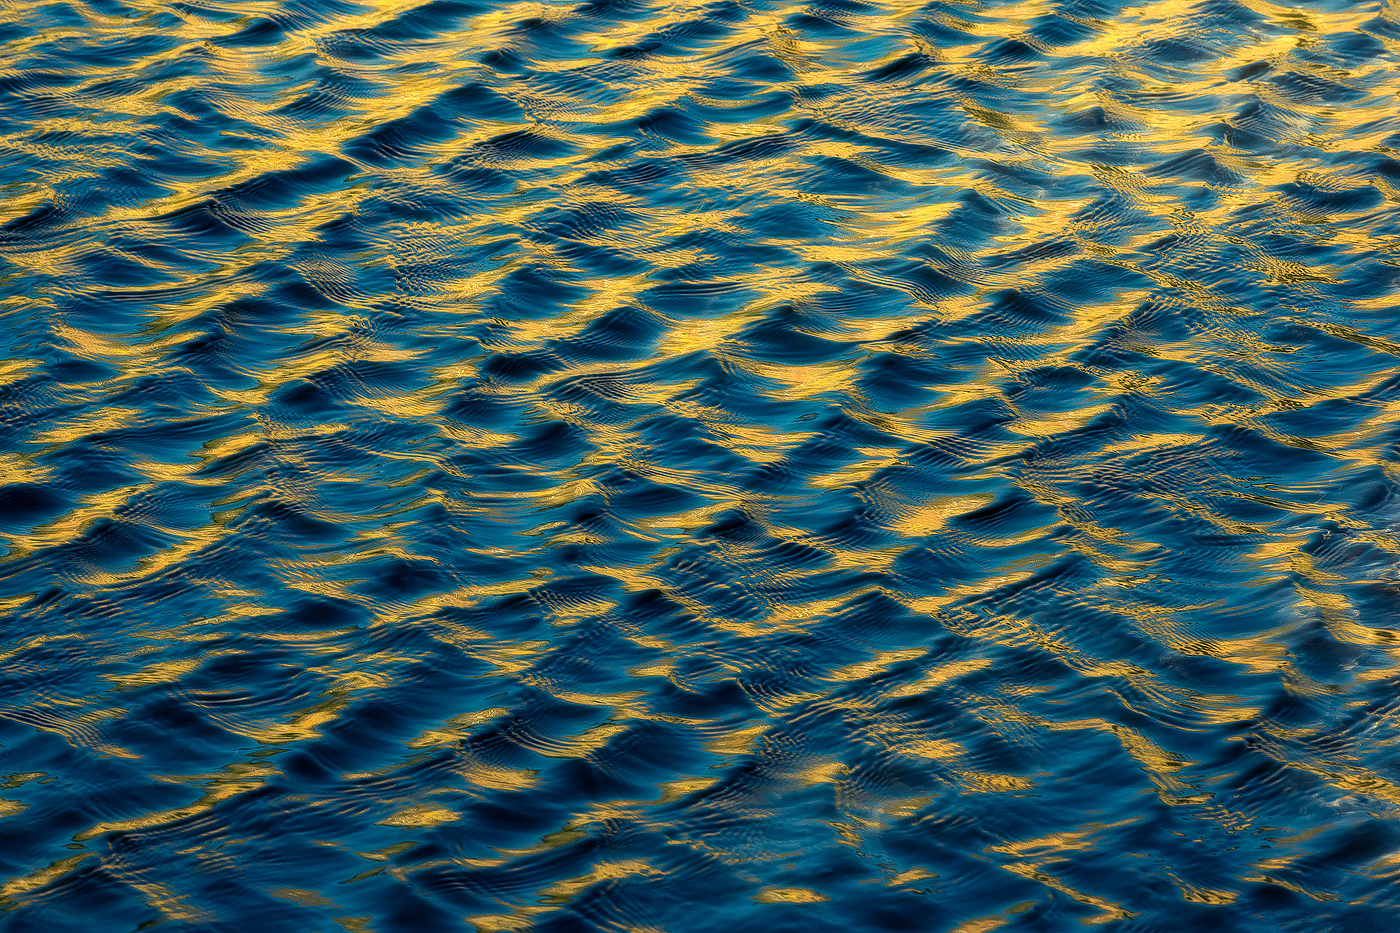 Ripples from Autumn